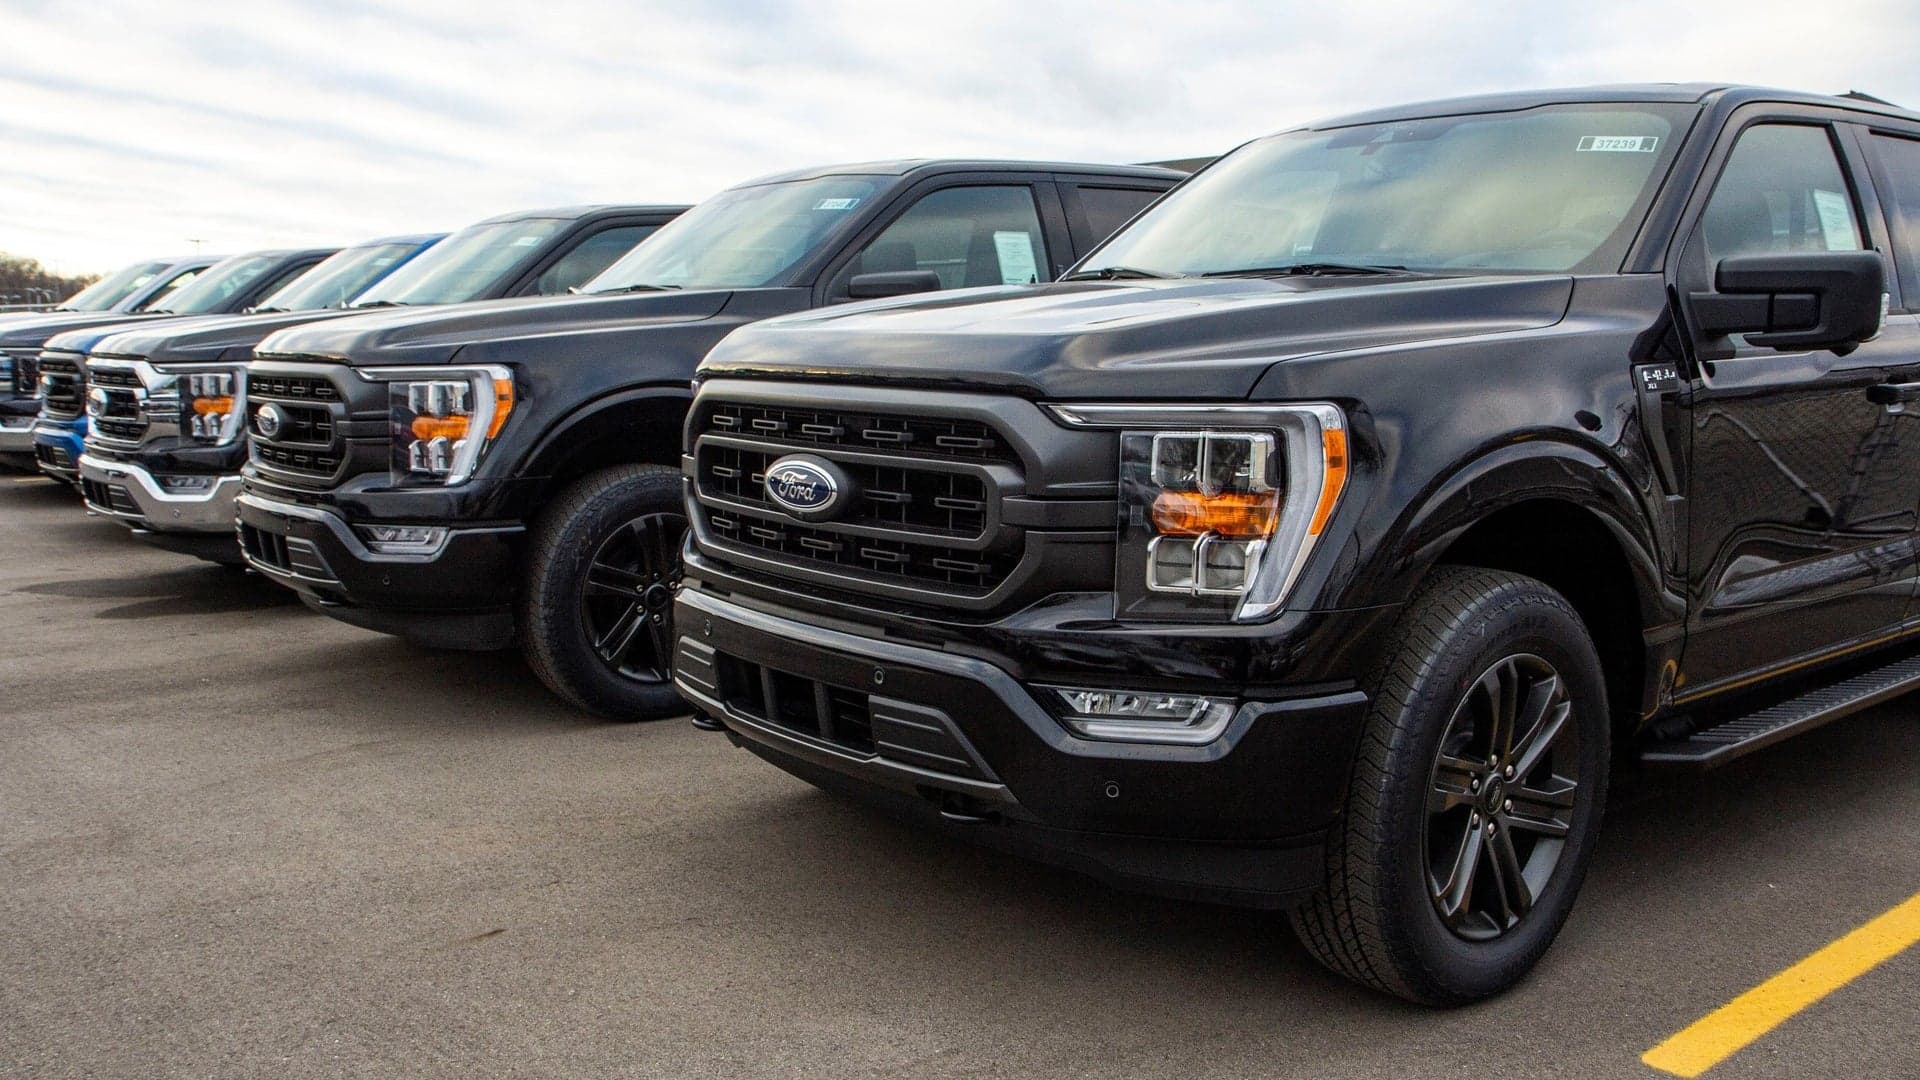 Ford Secures Chips to Finally Finish Thousands of Incomplete F-150 Pickups